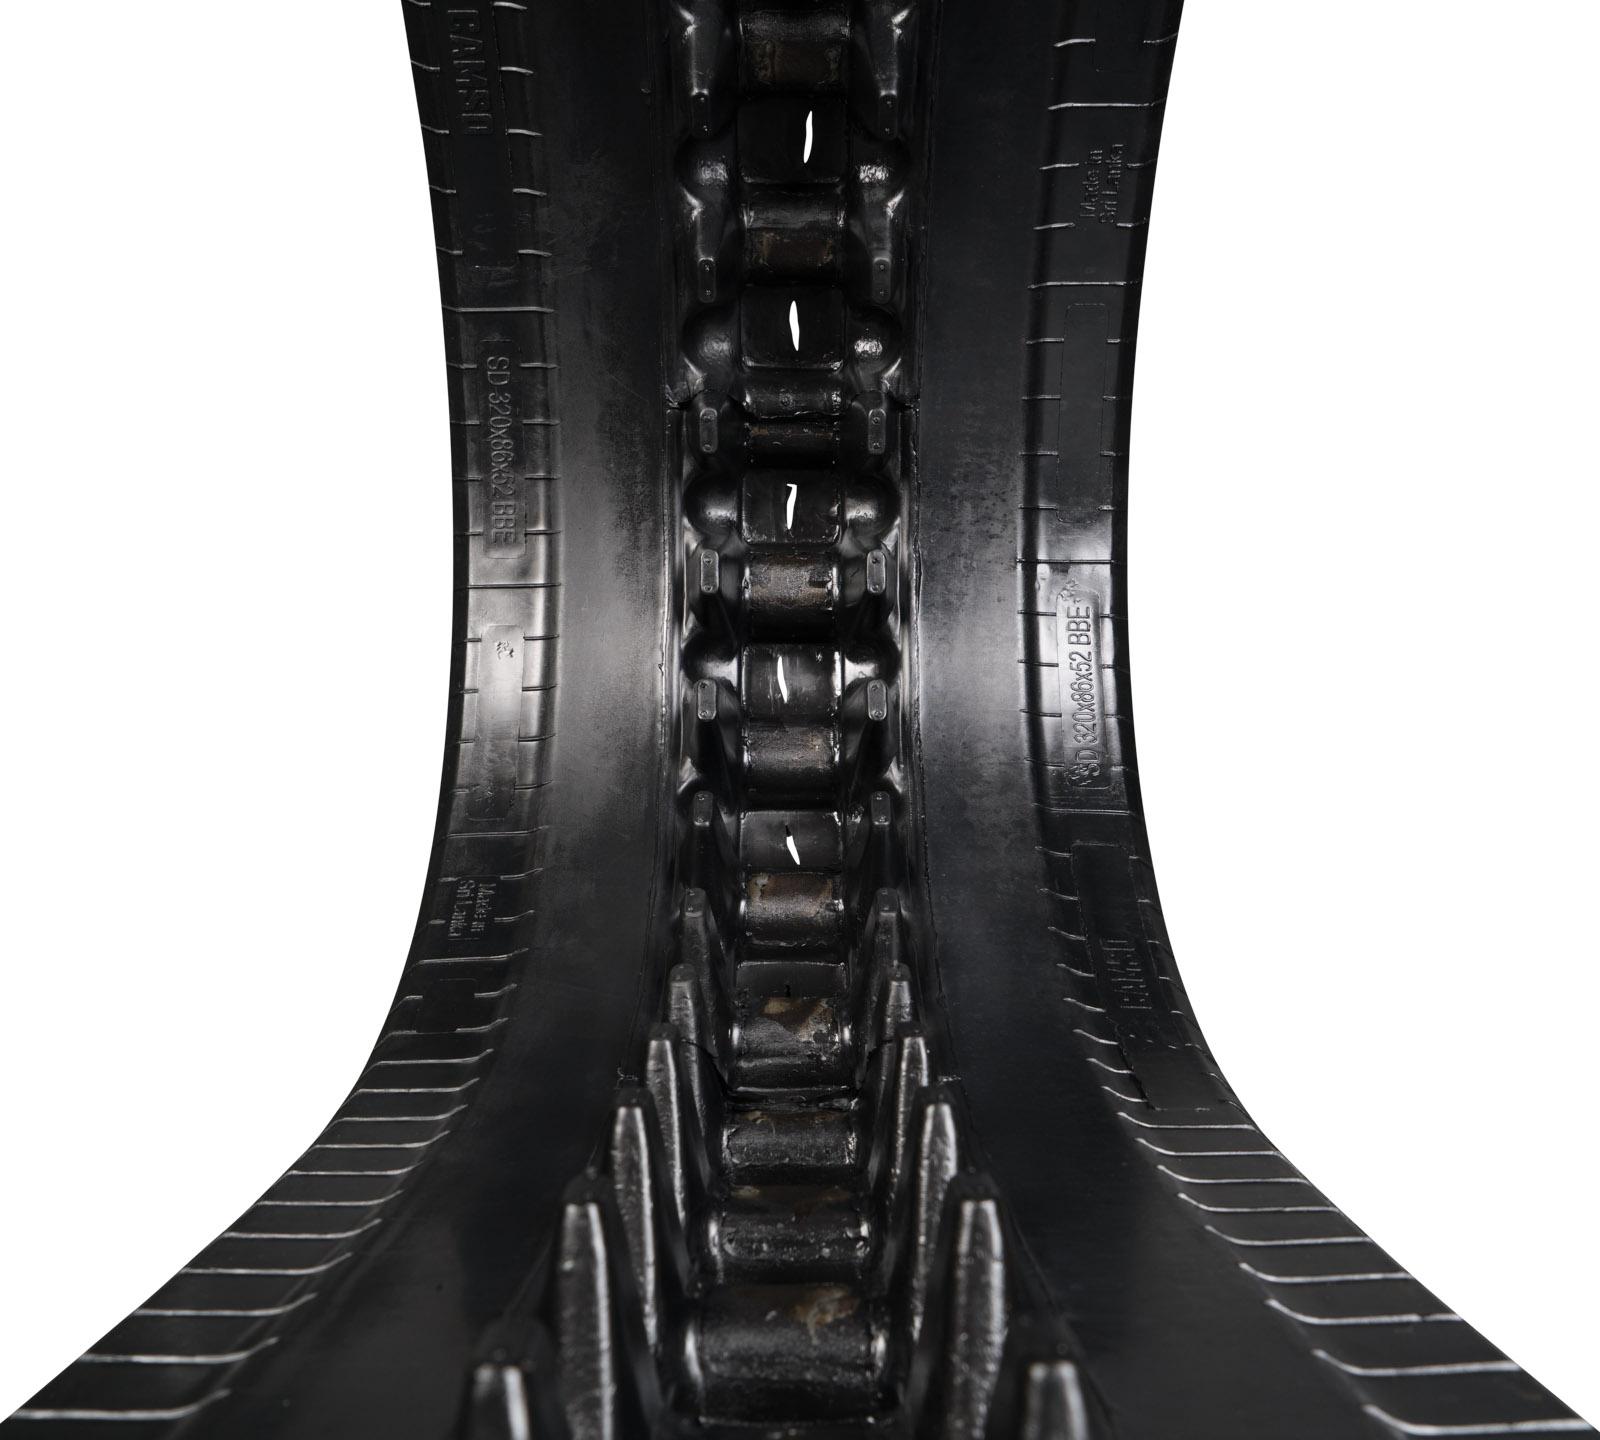 set of 2 13" camso heavy duty sawtooth pattern rubber track (320x86bx50)